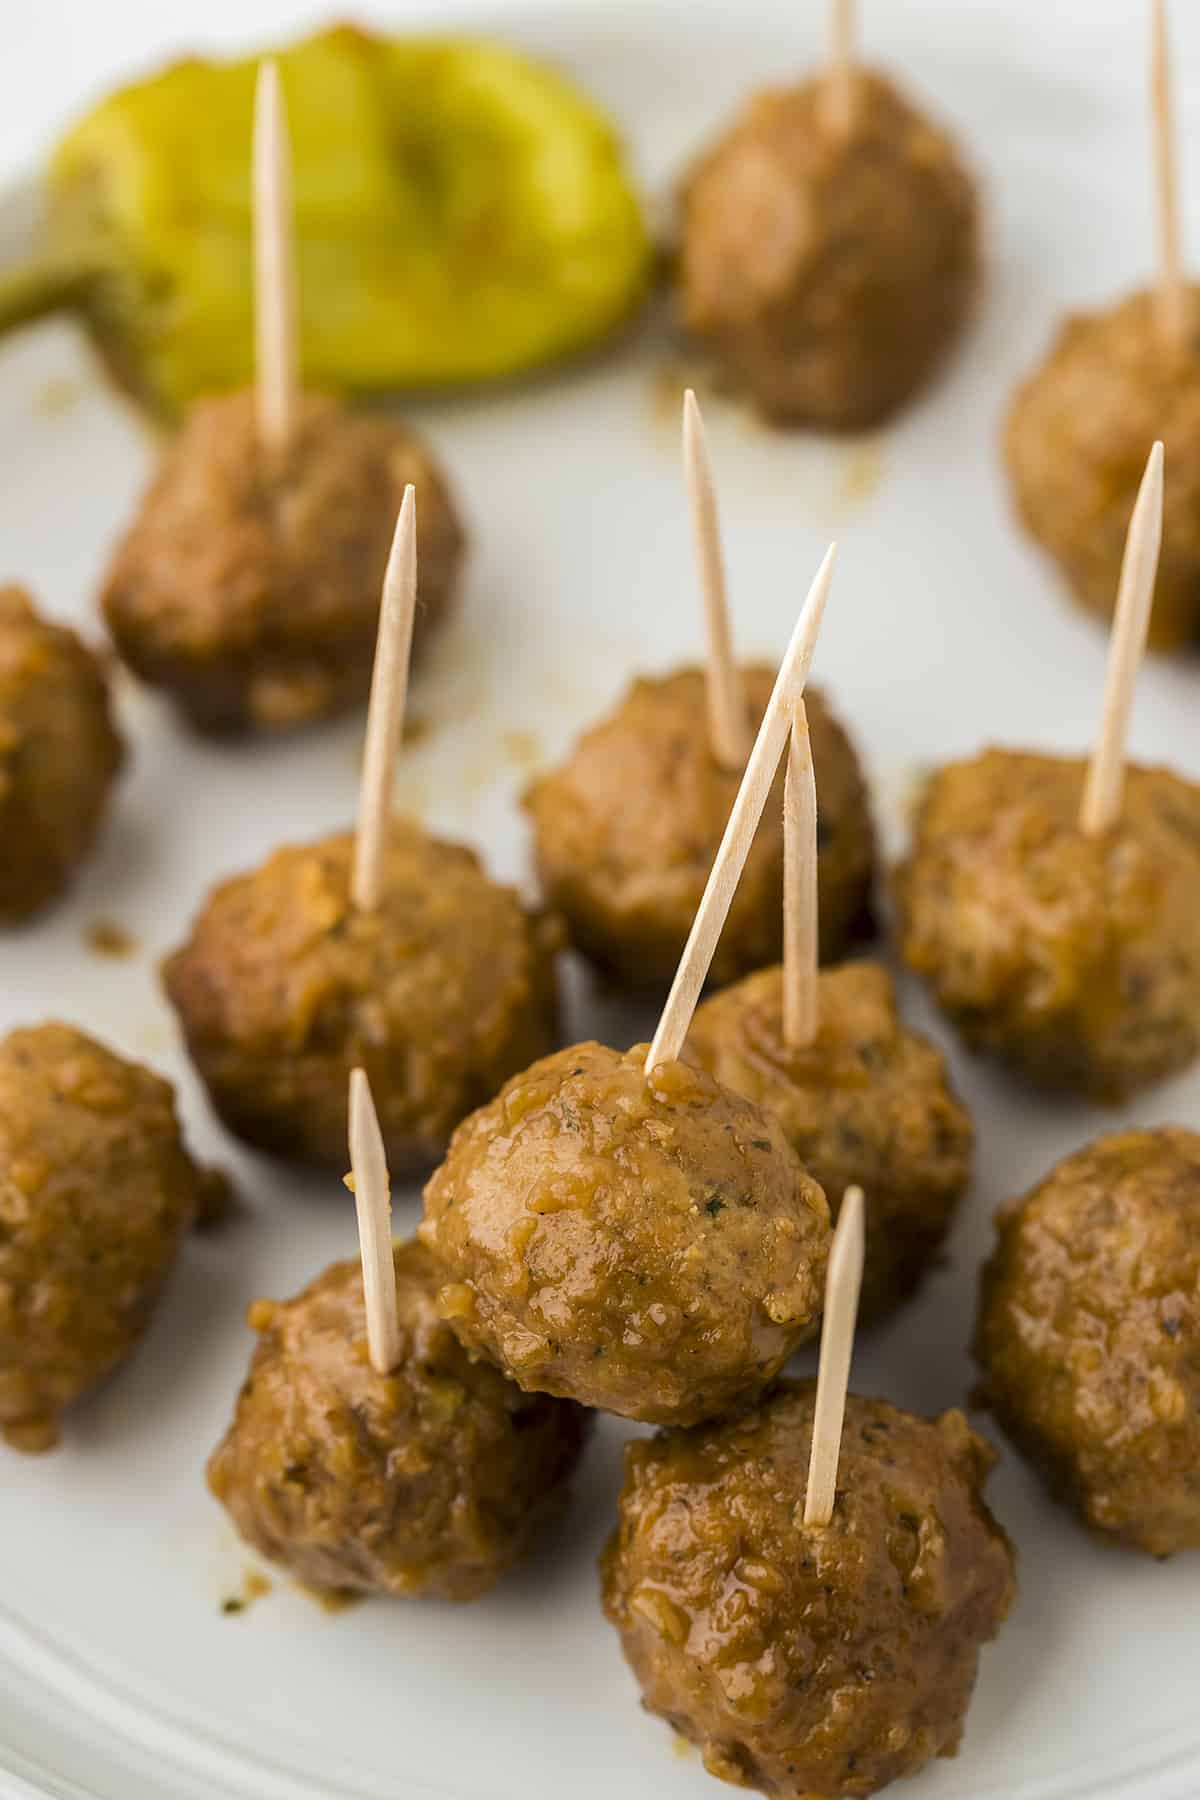 Meatballs with toothpicks stuck in them for serving.